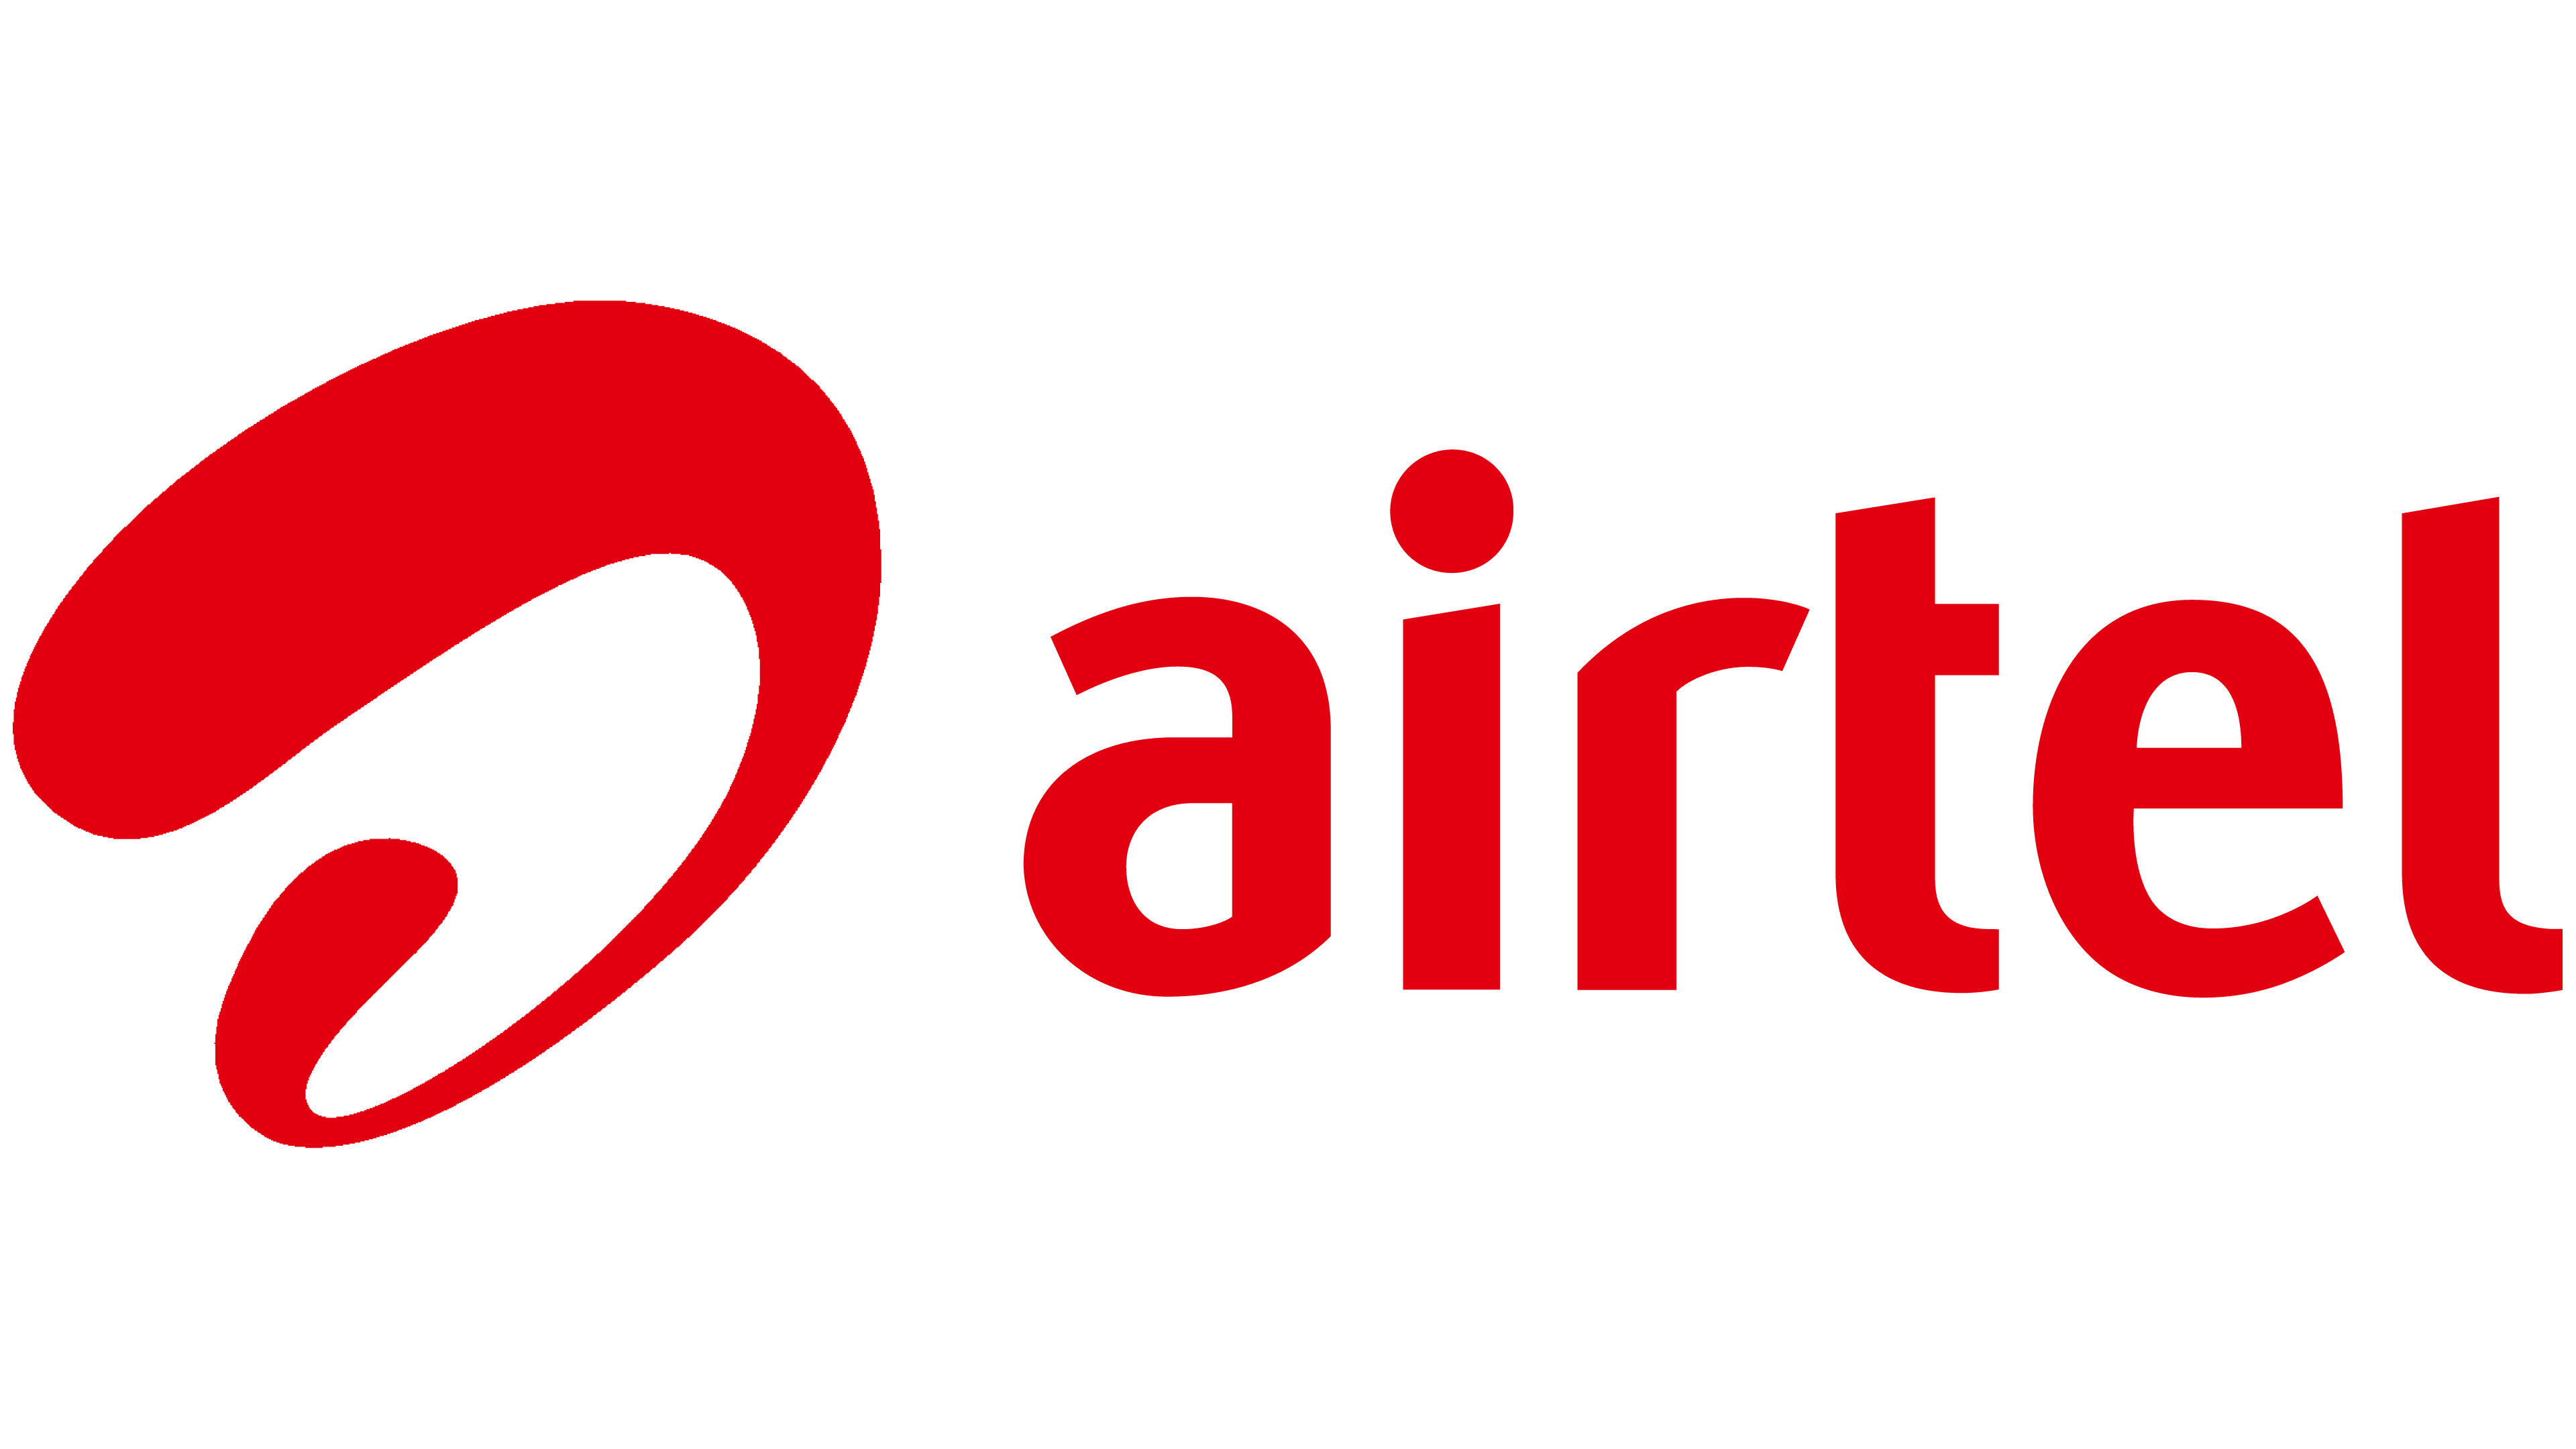 Dialog, Axiata Group and Bharti Airtel sign Definitive Agreement to Merge Operations in Sri Lanka